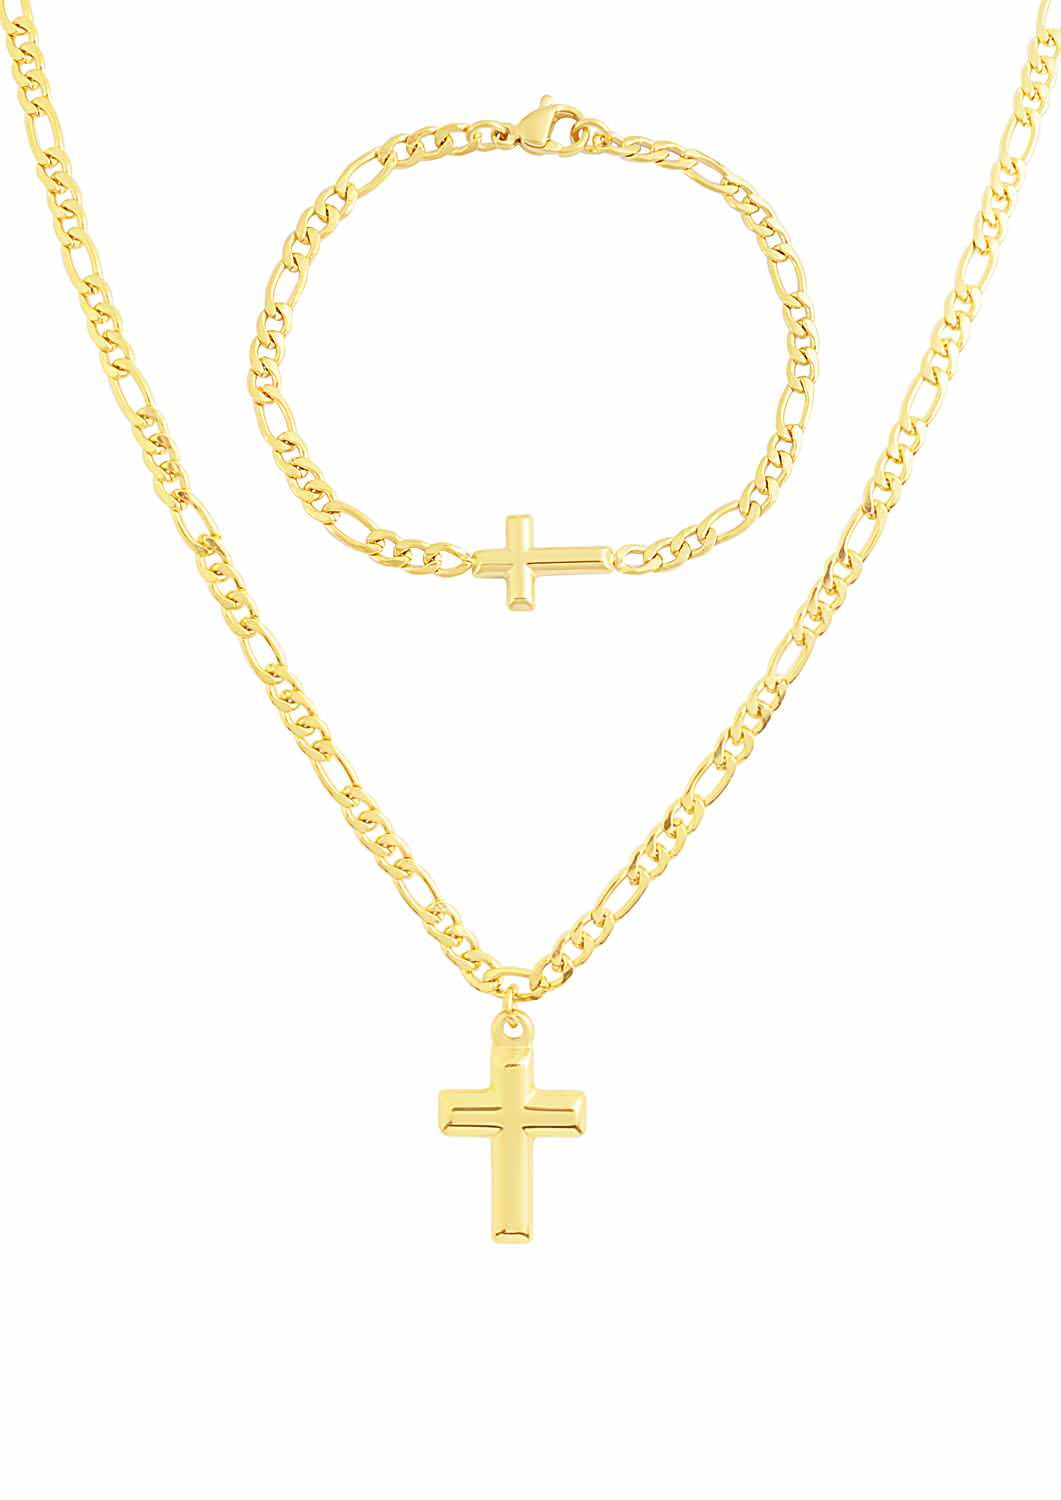 14K Two-Tone Gold Textured Spiral Tube Cross Crucifix Pendant Figaro Chain Necklace 